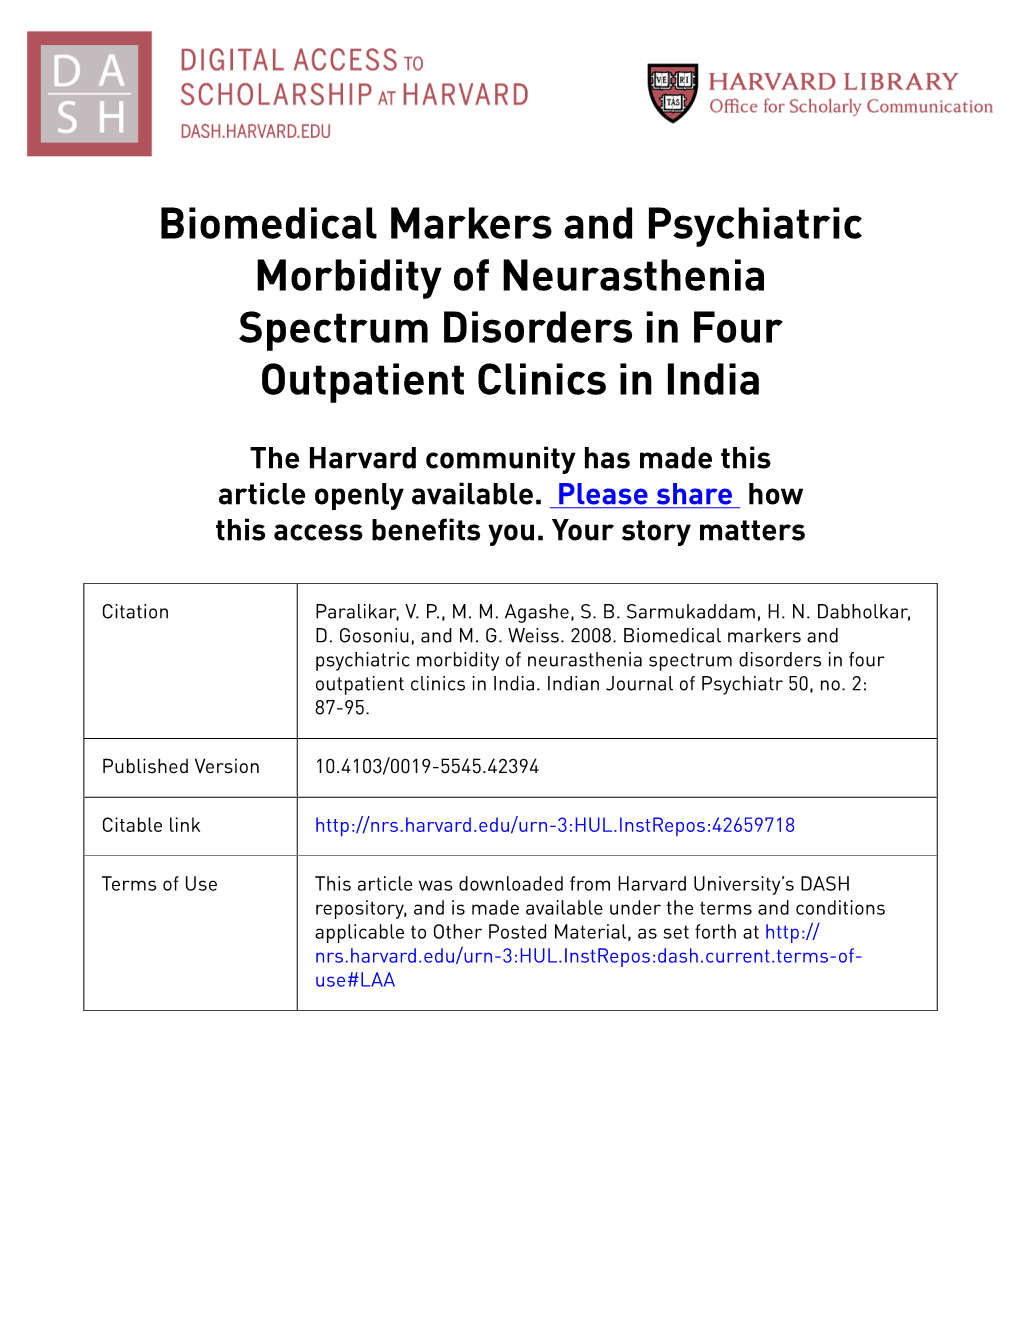 Biomedical Markers and Psychiatric Morbidity of Neurasthenia Spectrum Disorders in Four Outpatient Clinics in India